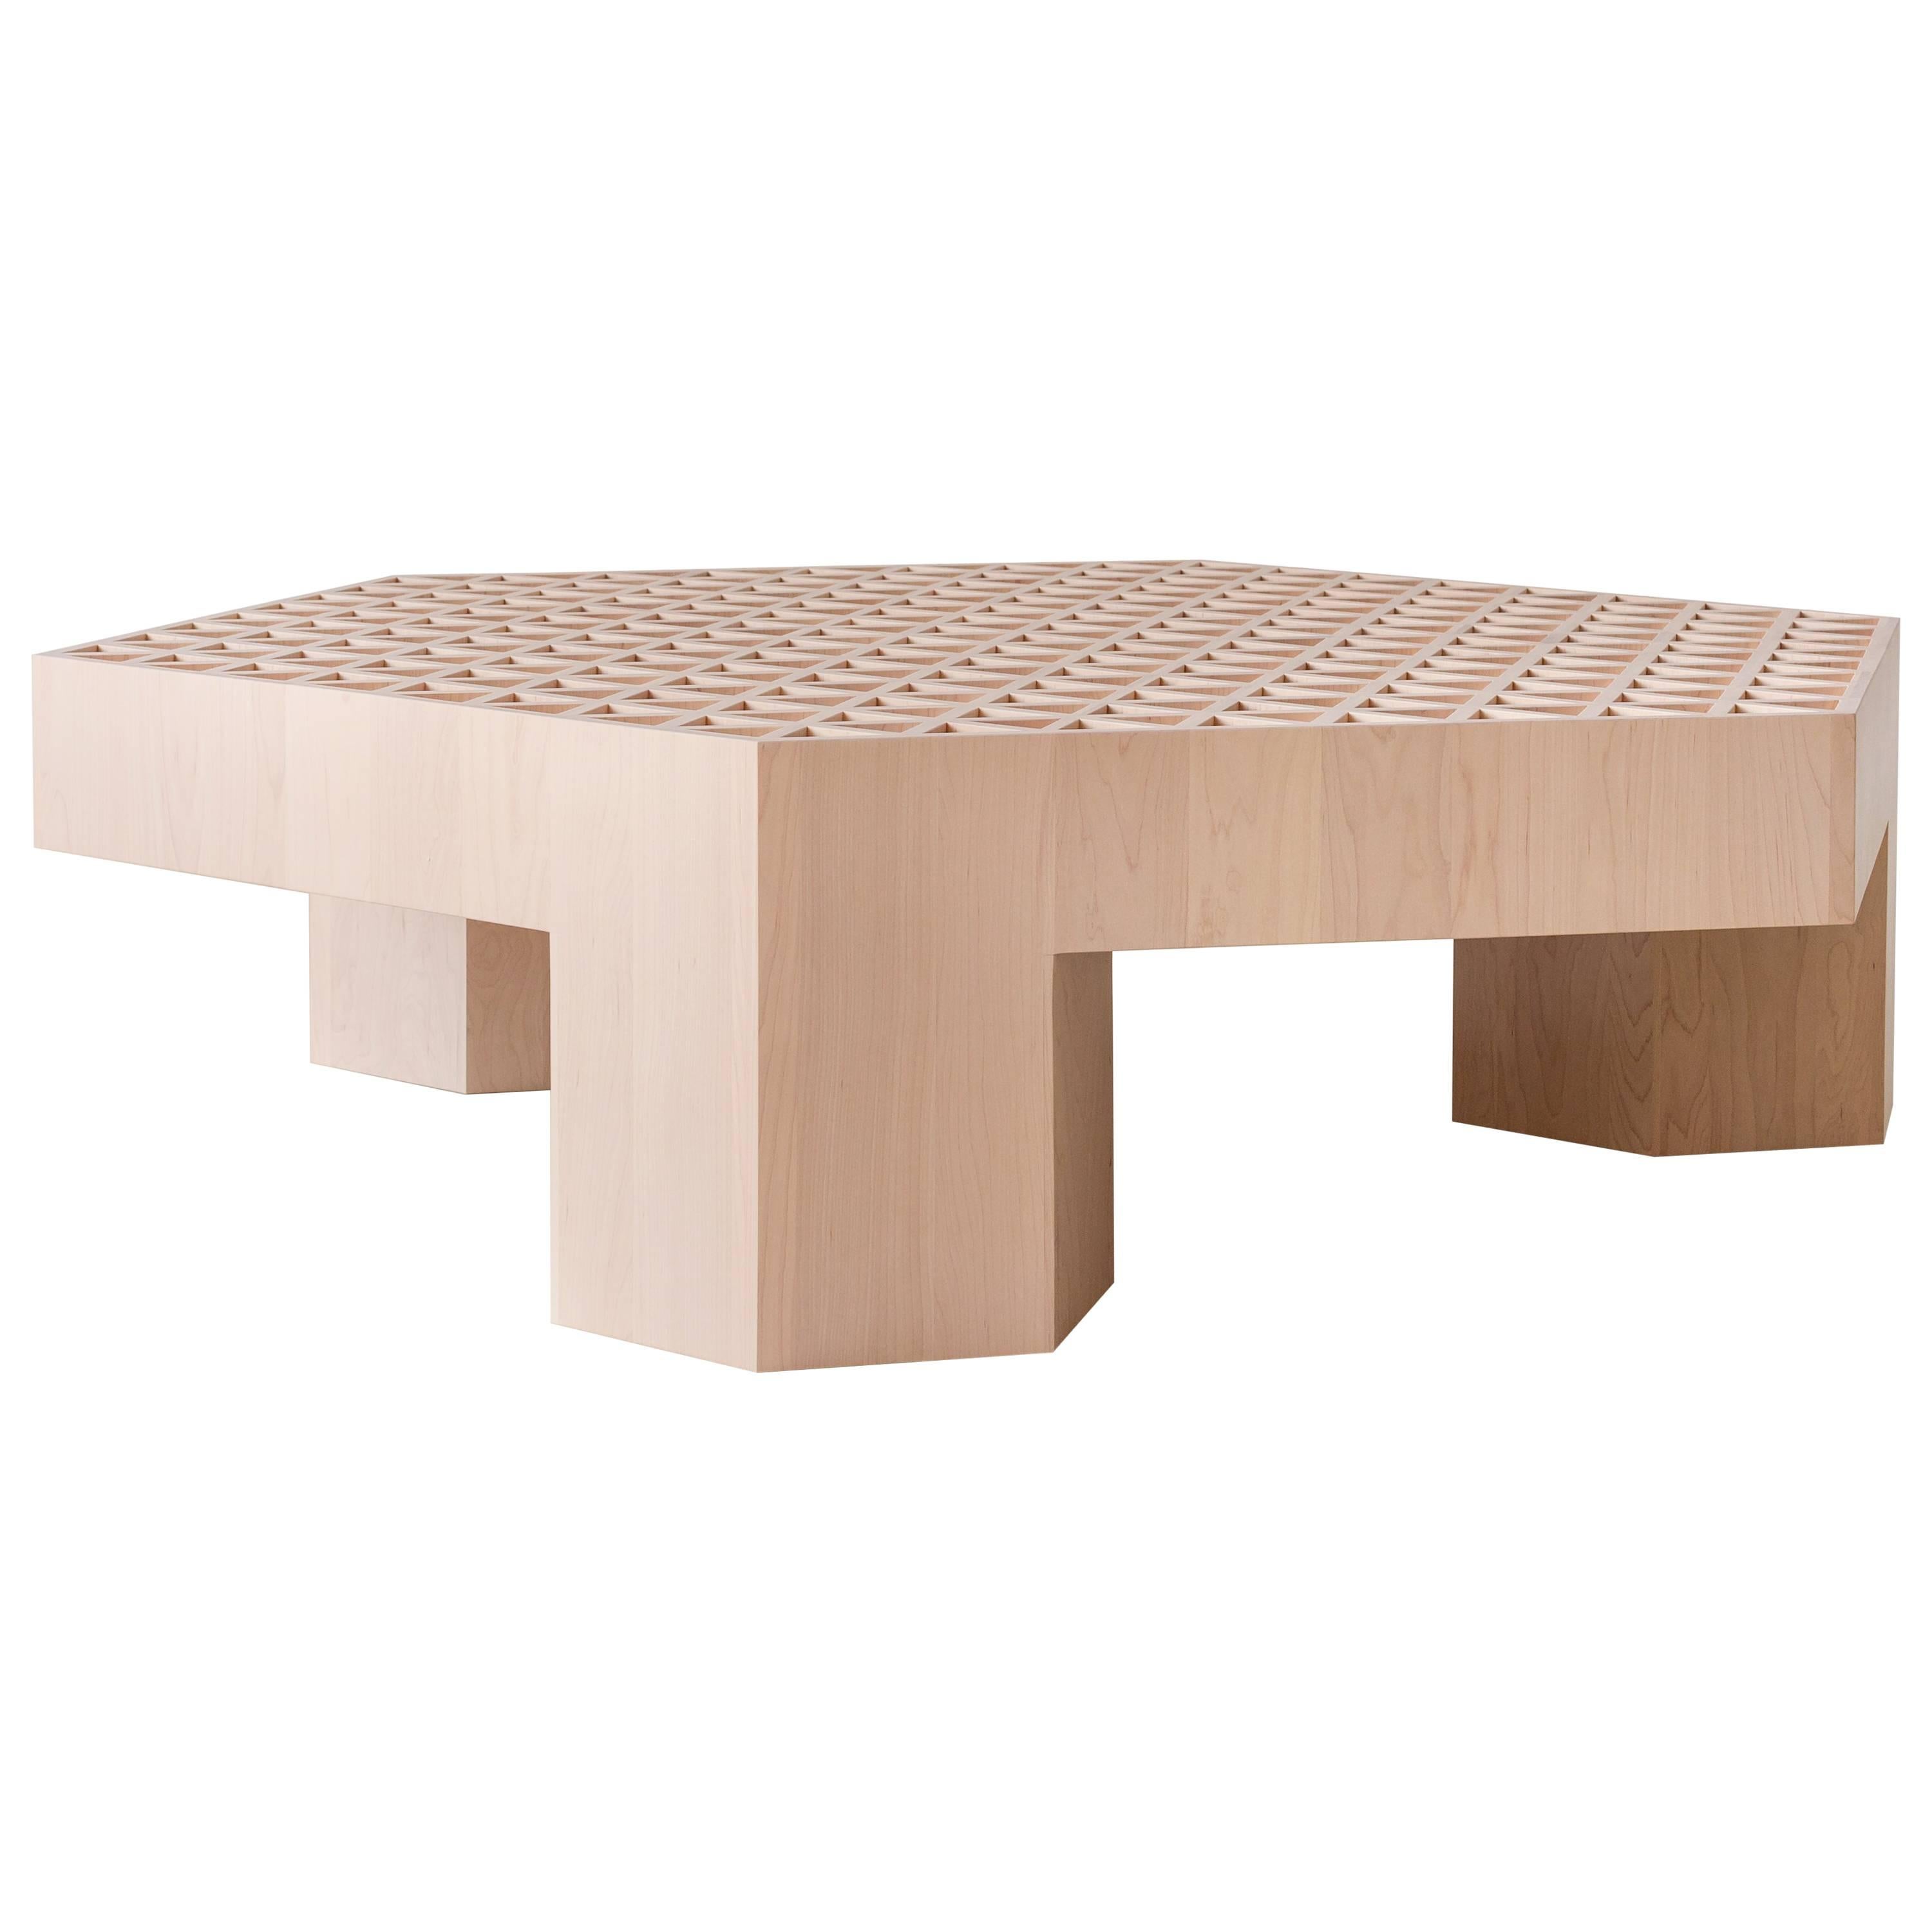 Limited Edition Assemblage Wood Coffee Table in Mapleby Fort Standard, in Stock